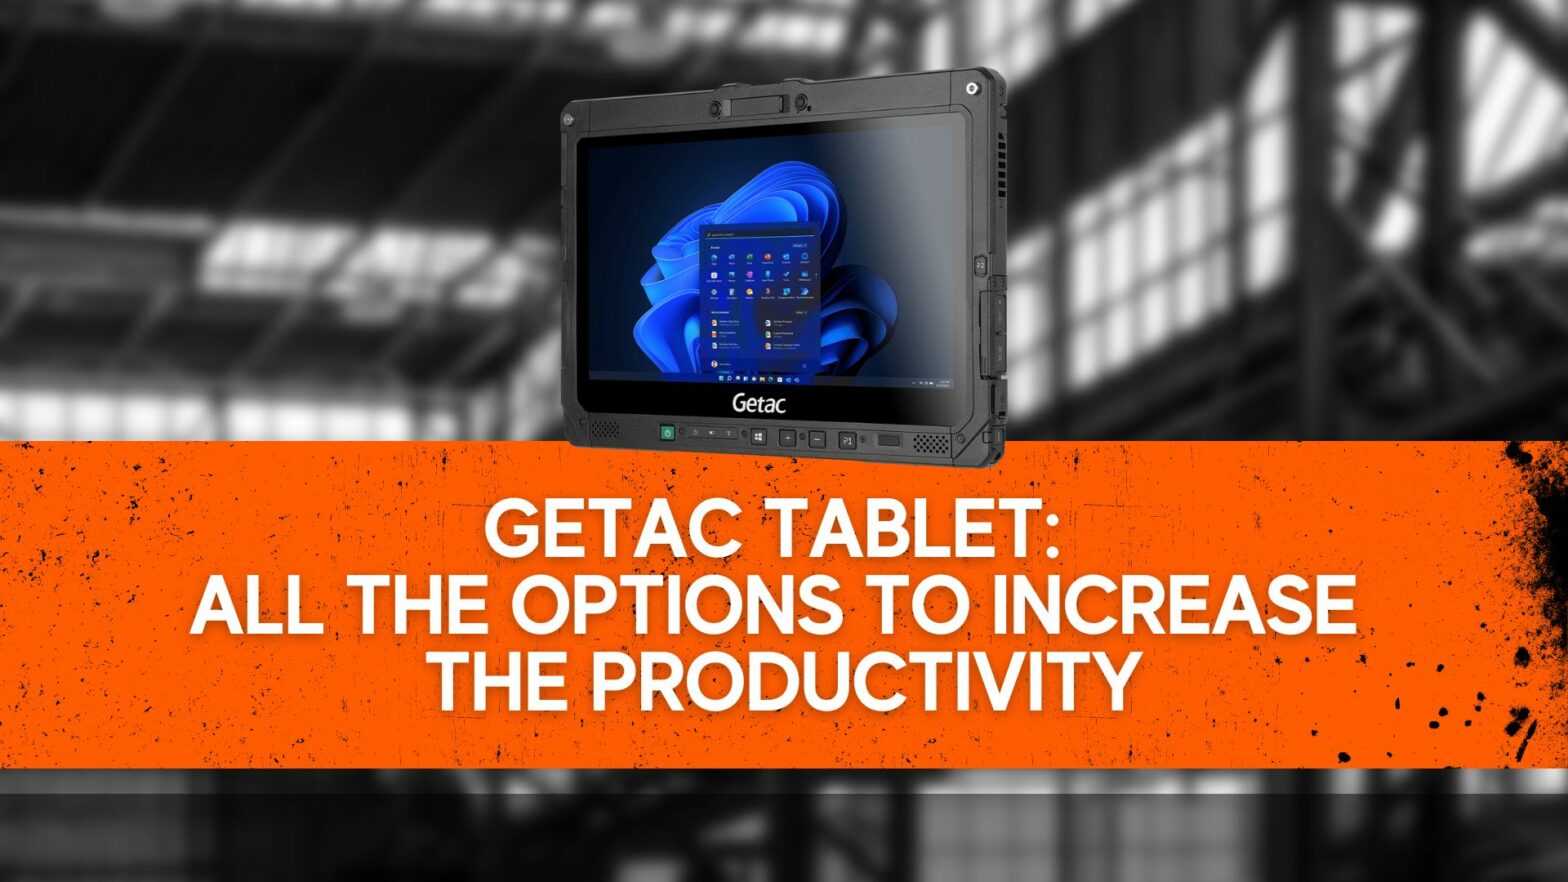 Getac Tablet All the options to increase the productivity